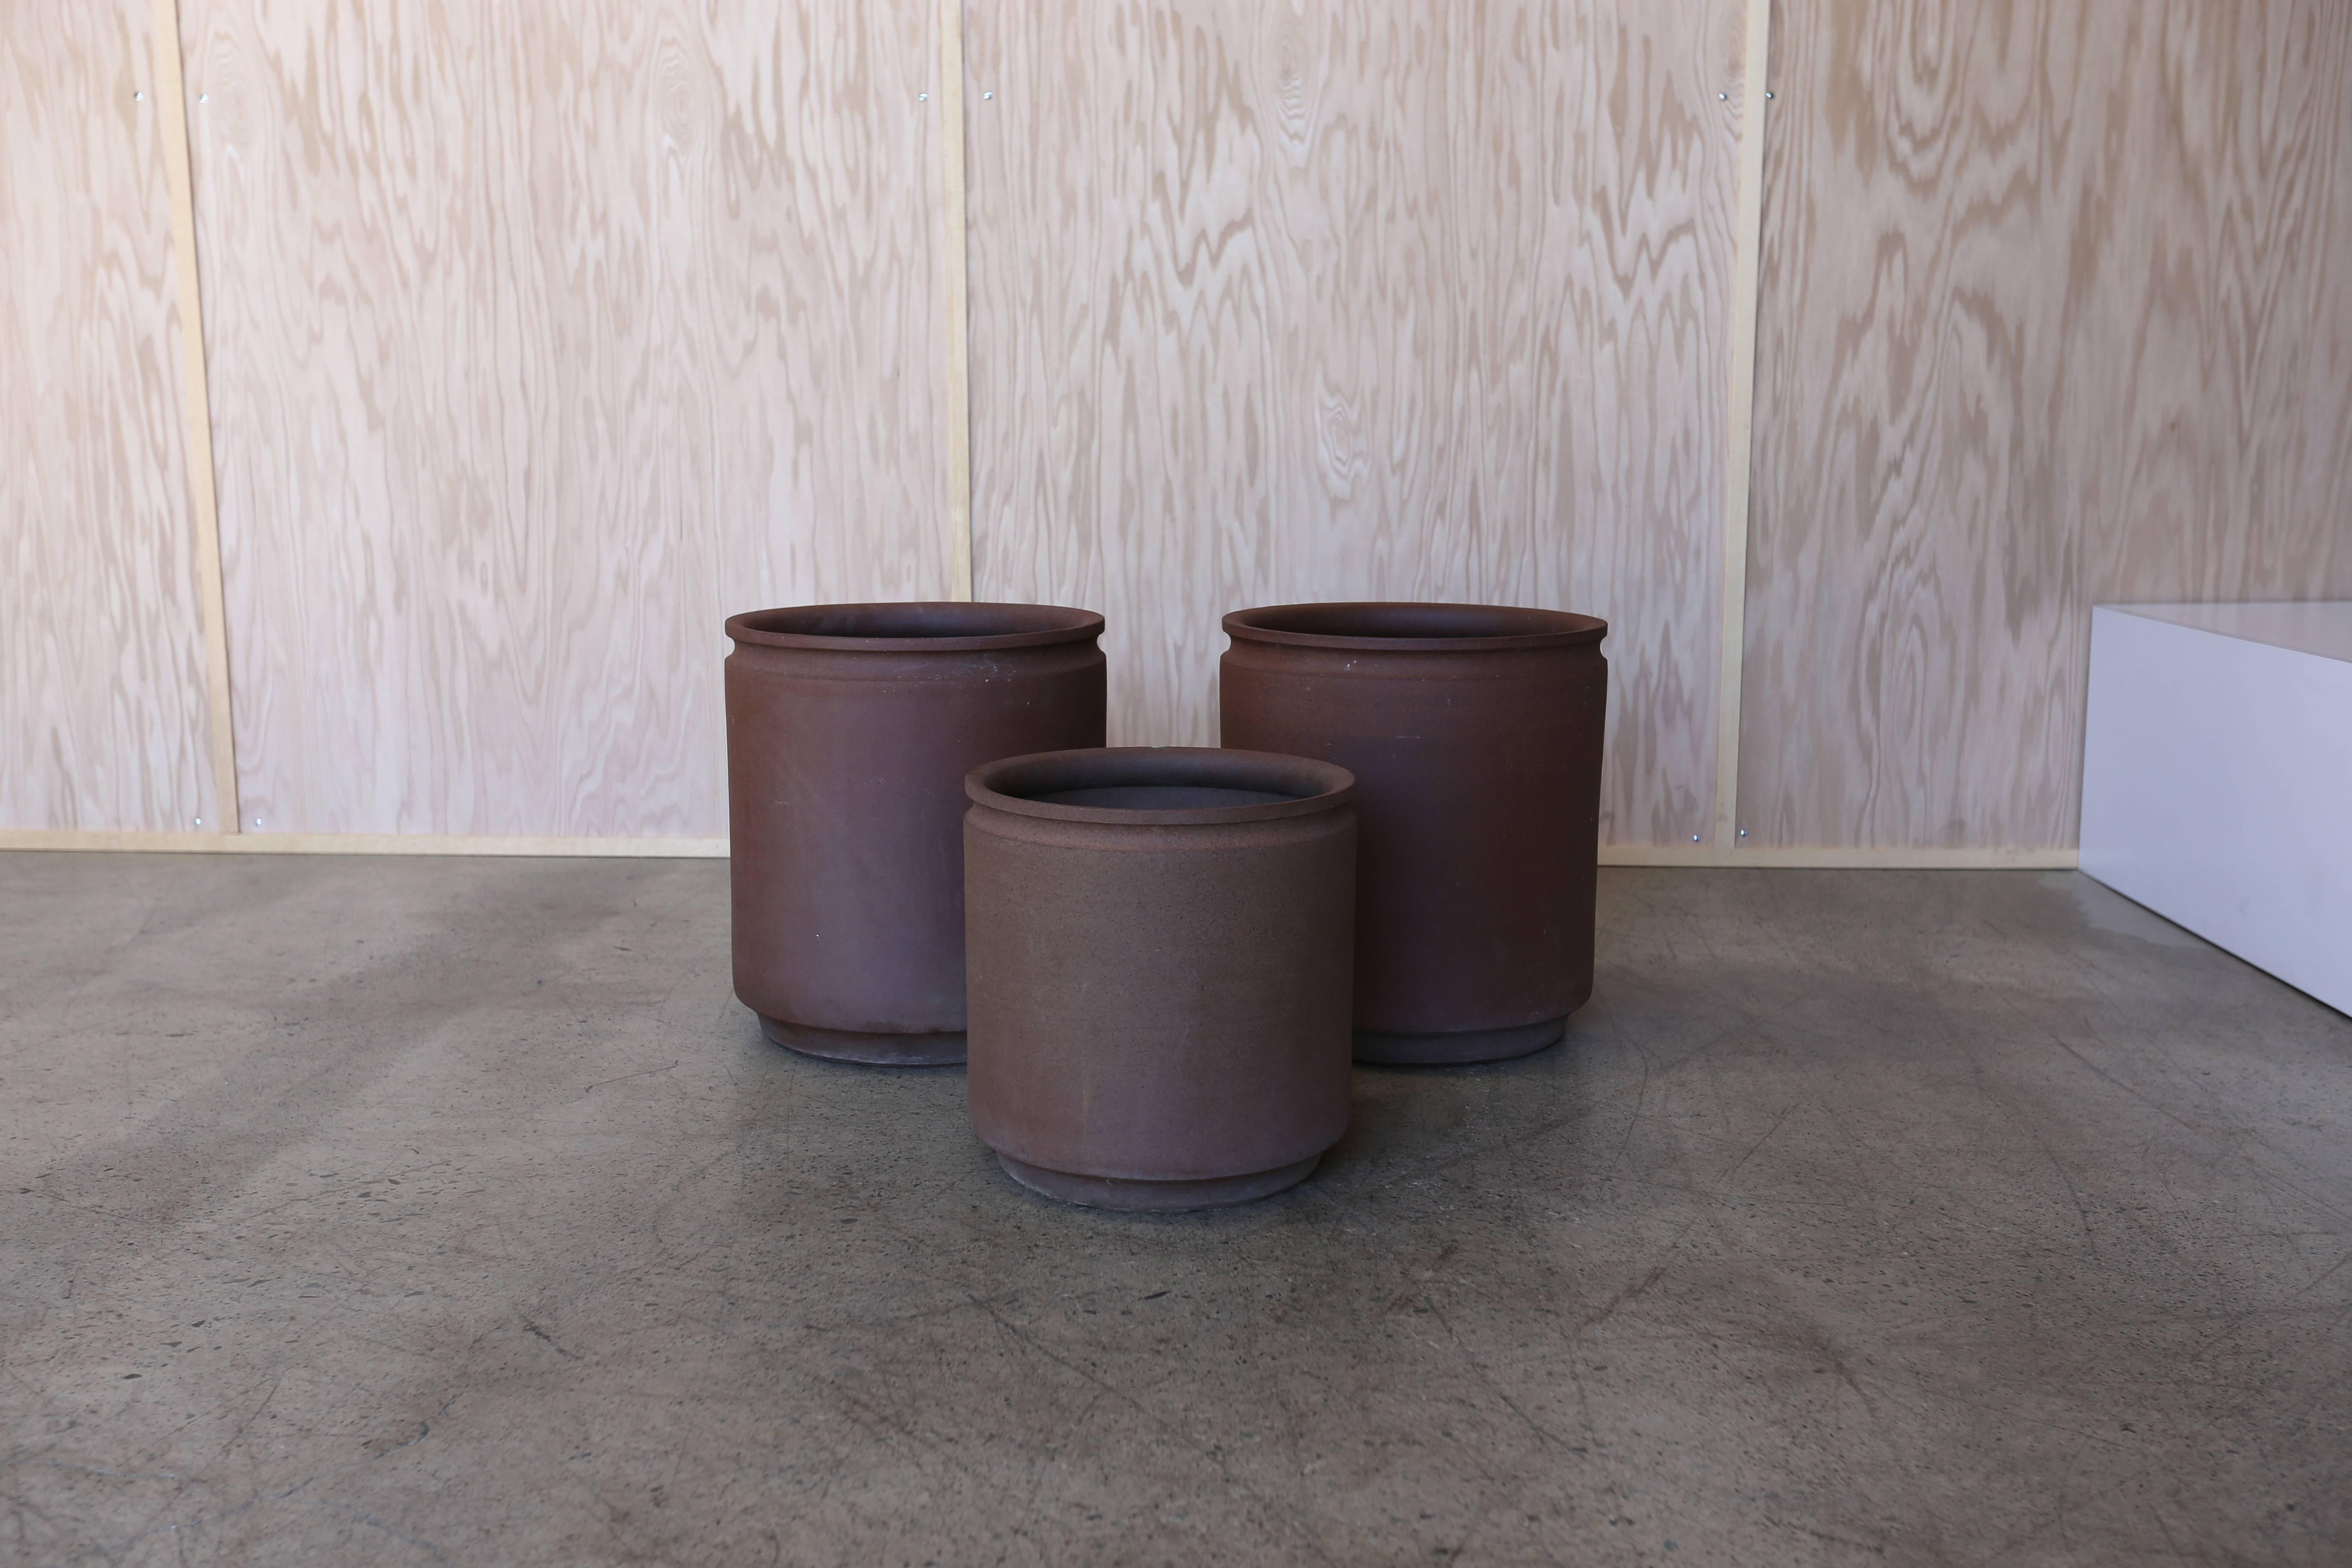 Group of three ceramic planters by David Cressey and Robert Maxwell for Earthgender Ceramics. 

Two planters measure: 17.25" x 18" x 19.5" tall. 

One planter measures: 14.75 x 14.75 x 15.25" tall.